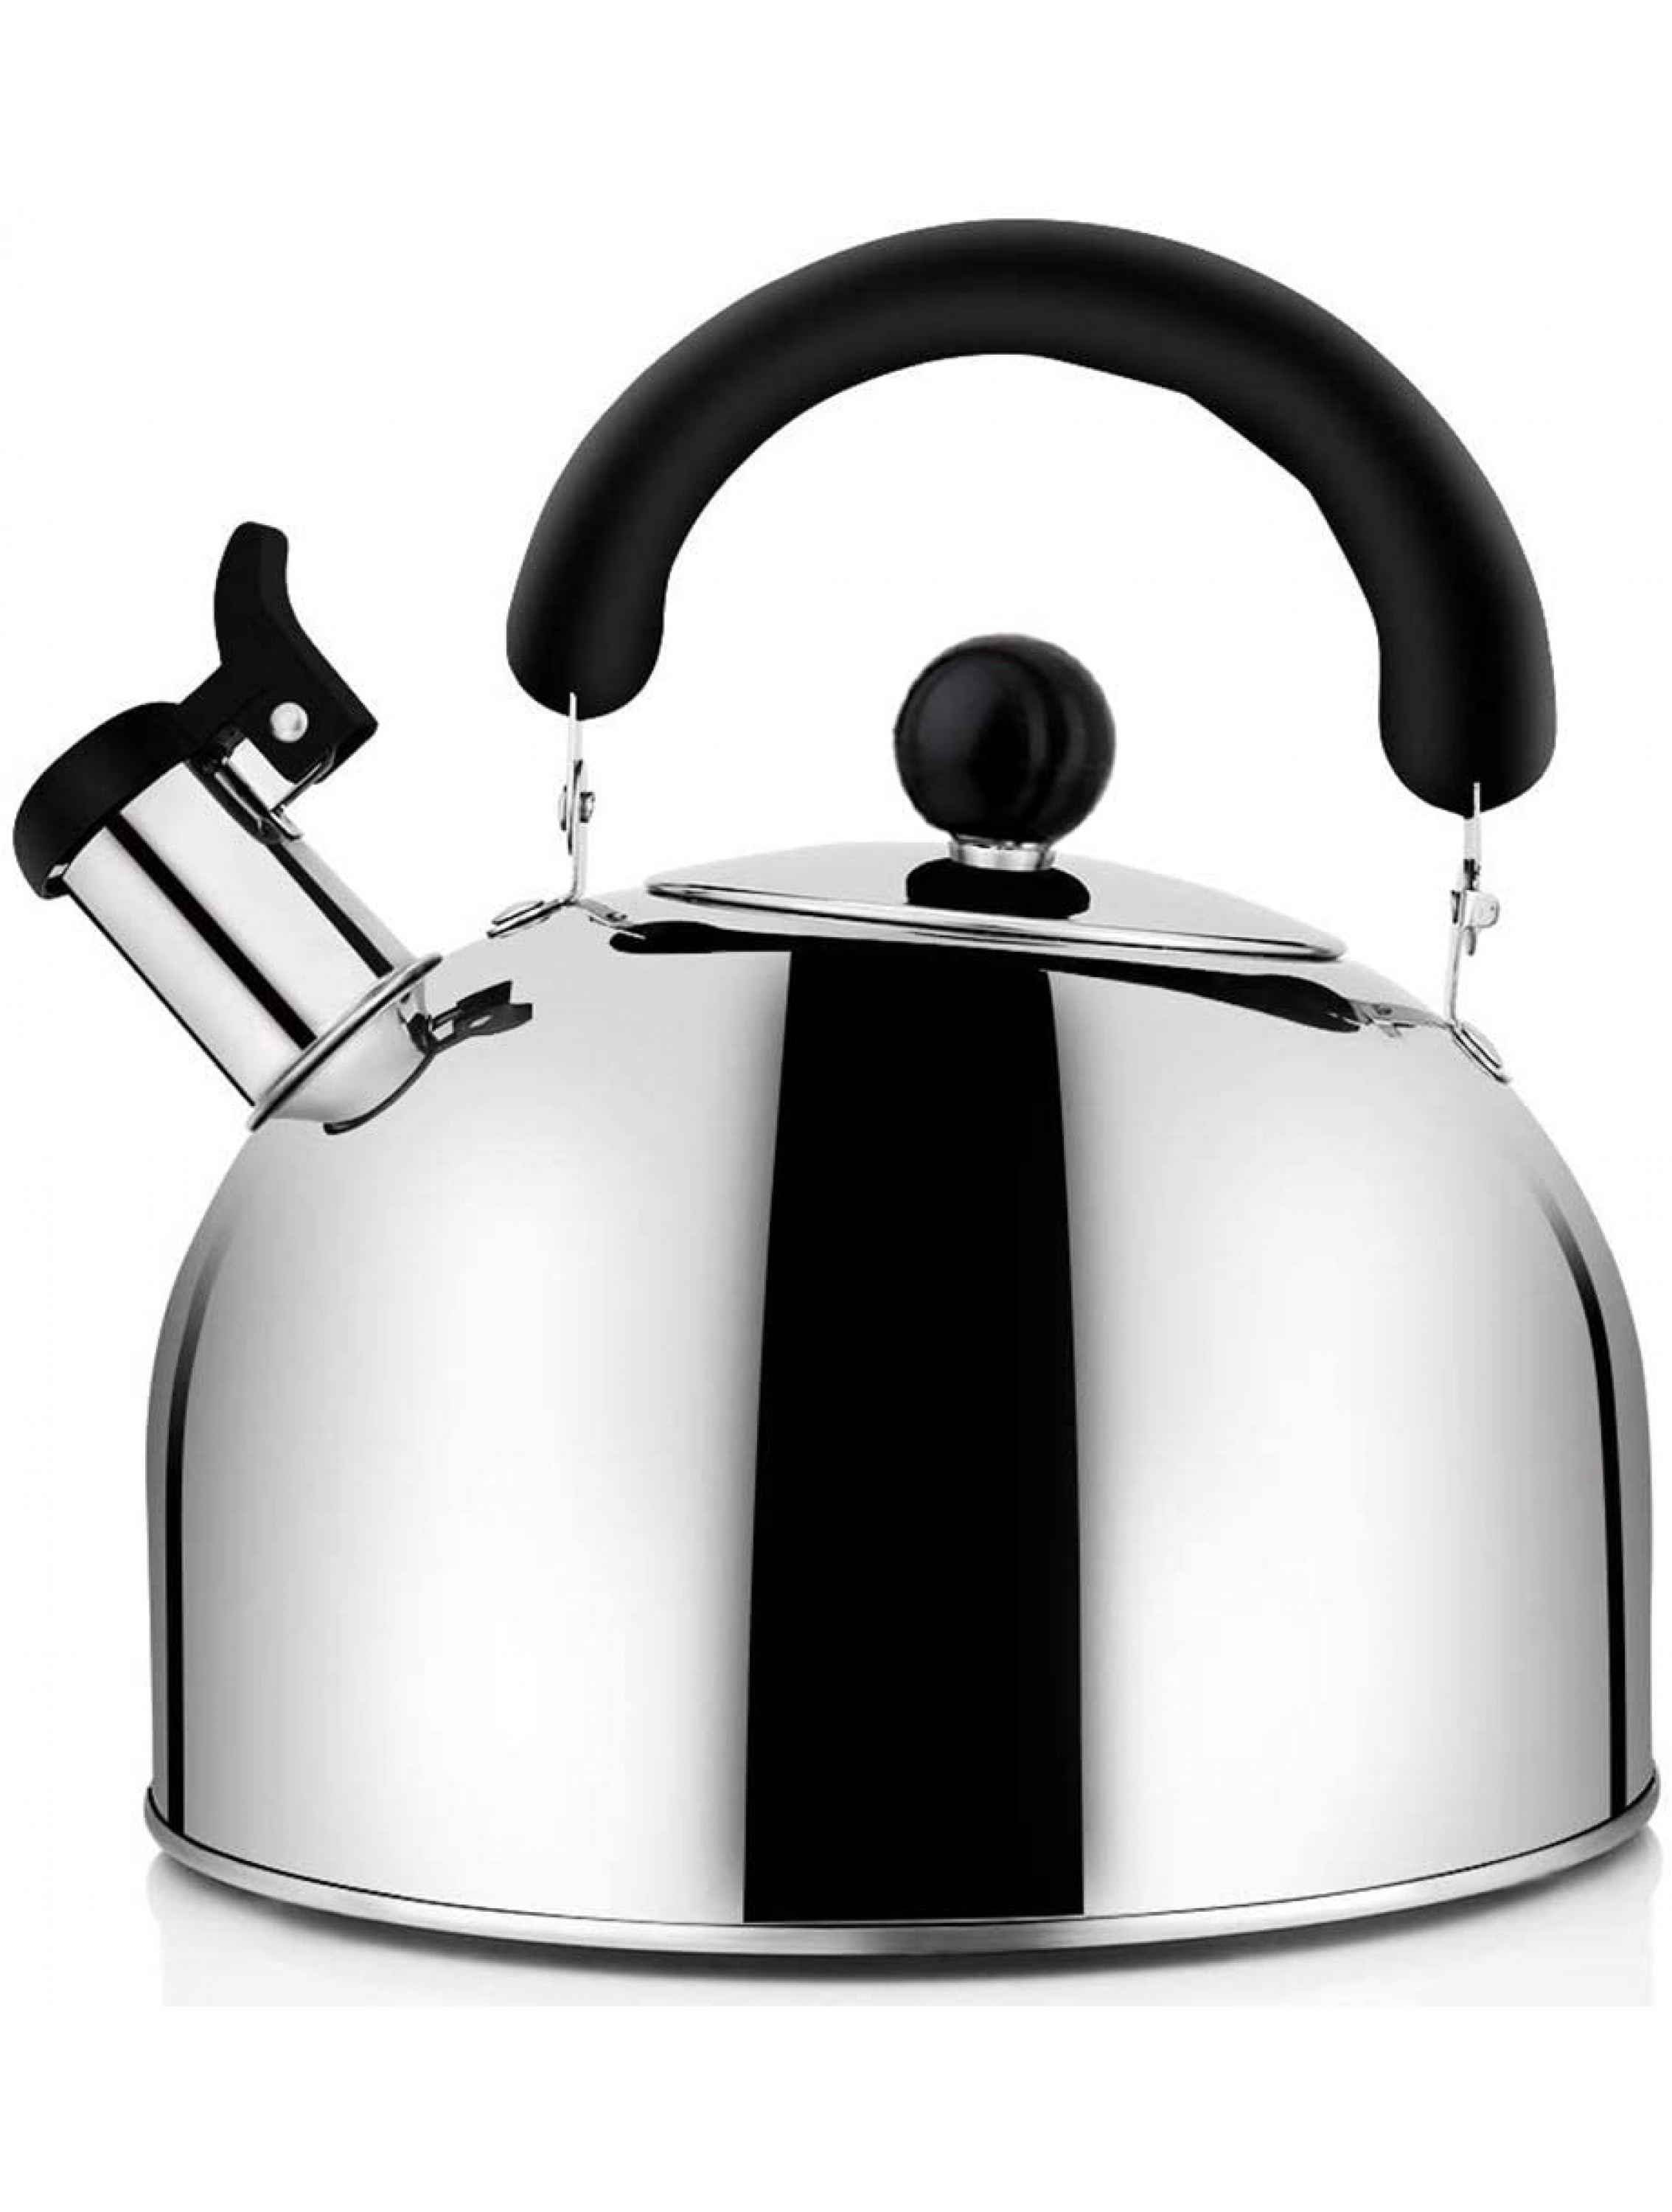 Perezy Tea Kettle Stovetop Whistling Tea Pot Steel Tea Kettles Tea Pots For Stove Top 4.3Qt4-Liter Large Capacity With Capsule Base - BXLXQWY4F